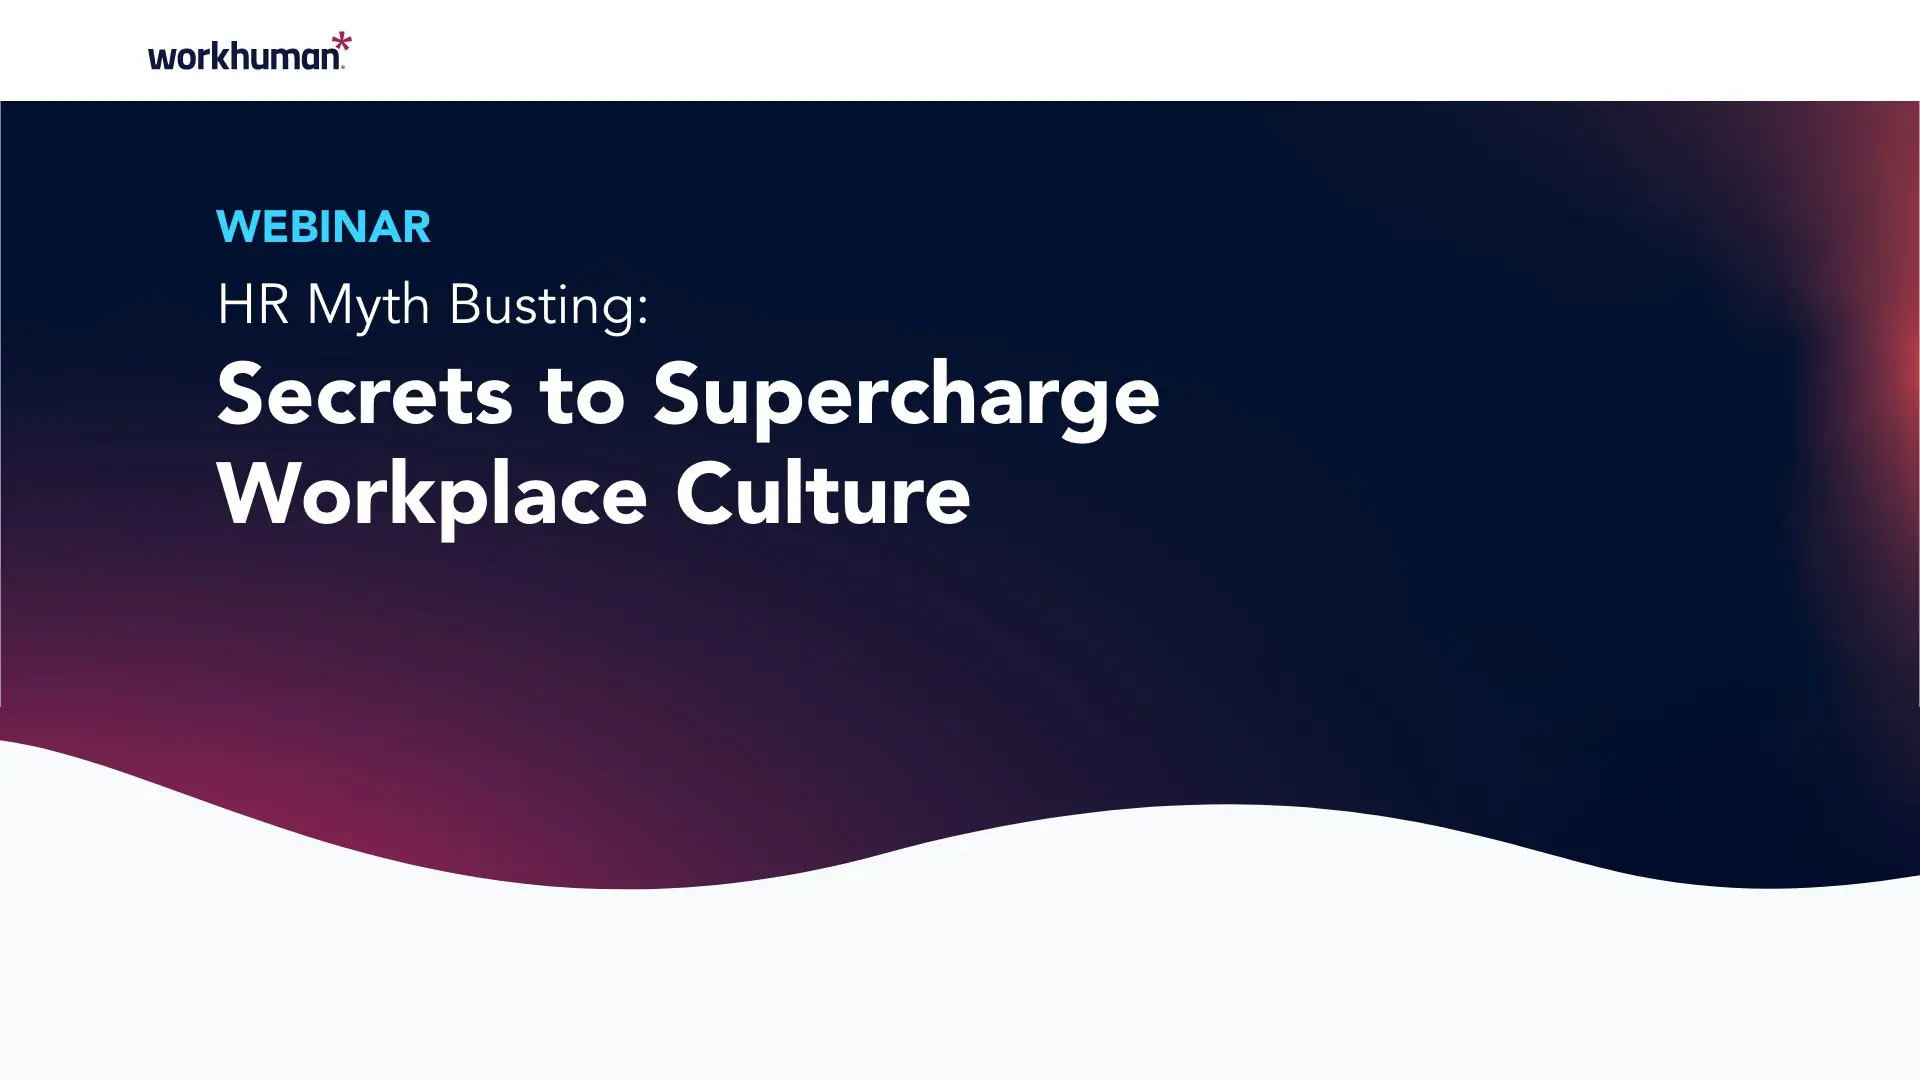 HR Myth Busting: Secrets to Super Charge Workplace Culture